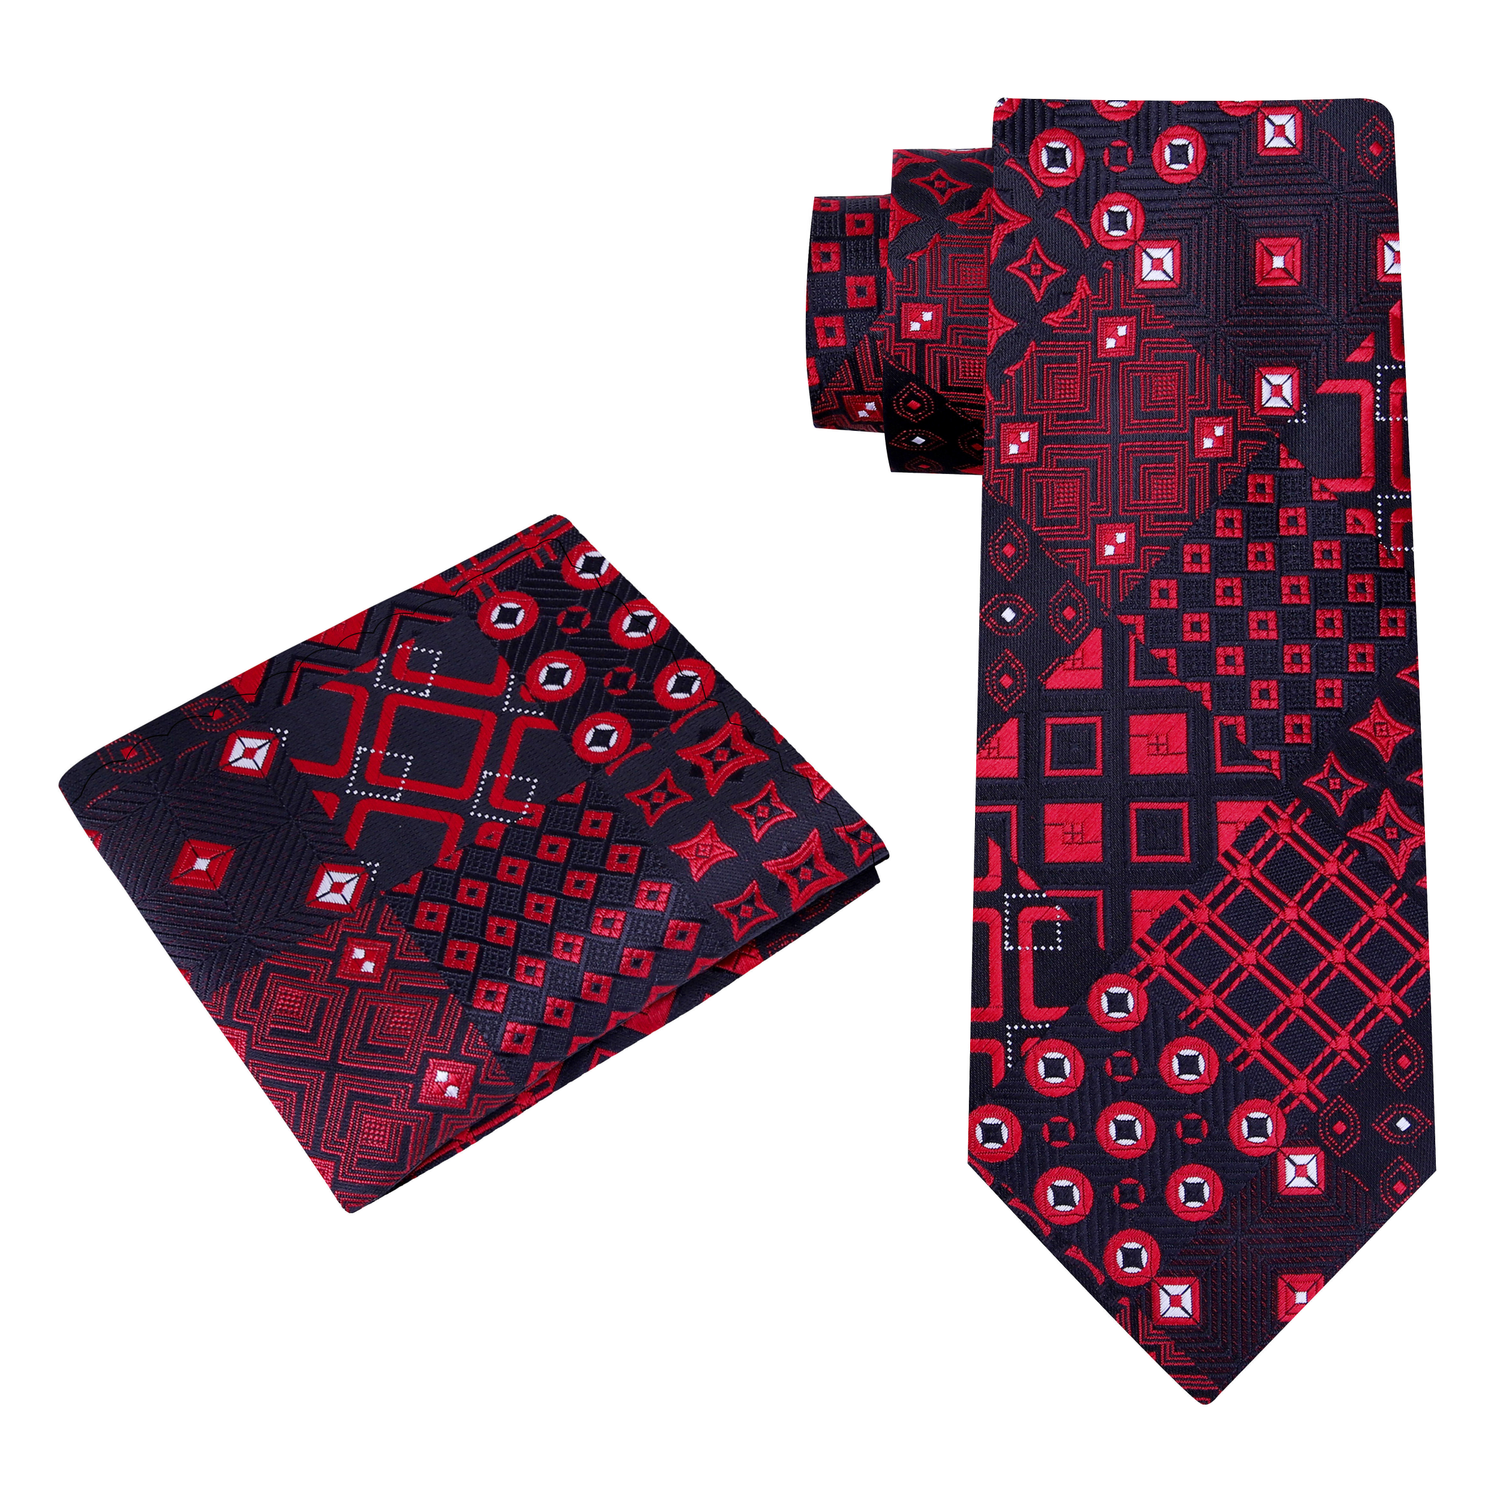 View 2: A Black, Red Abstract Geometric Shapes Pattern Silk Necktie, Matching Pocket Square